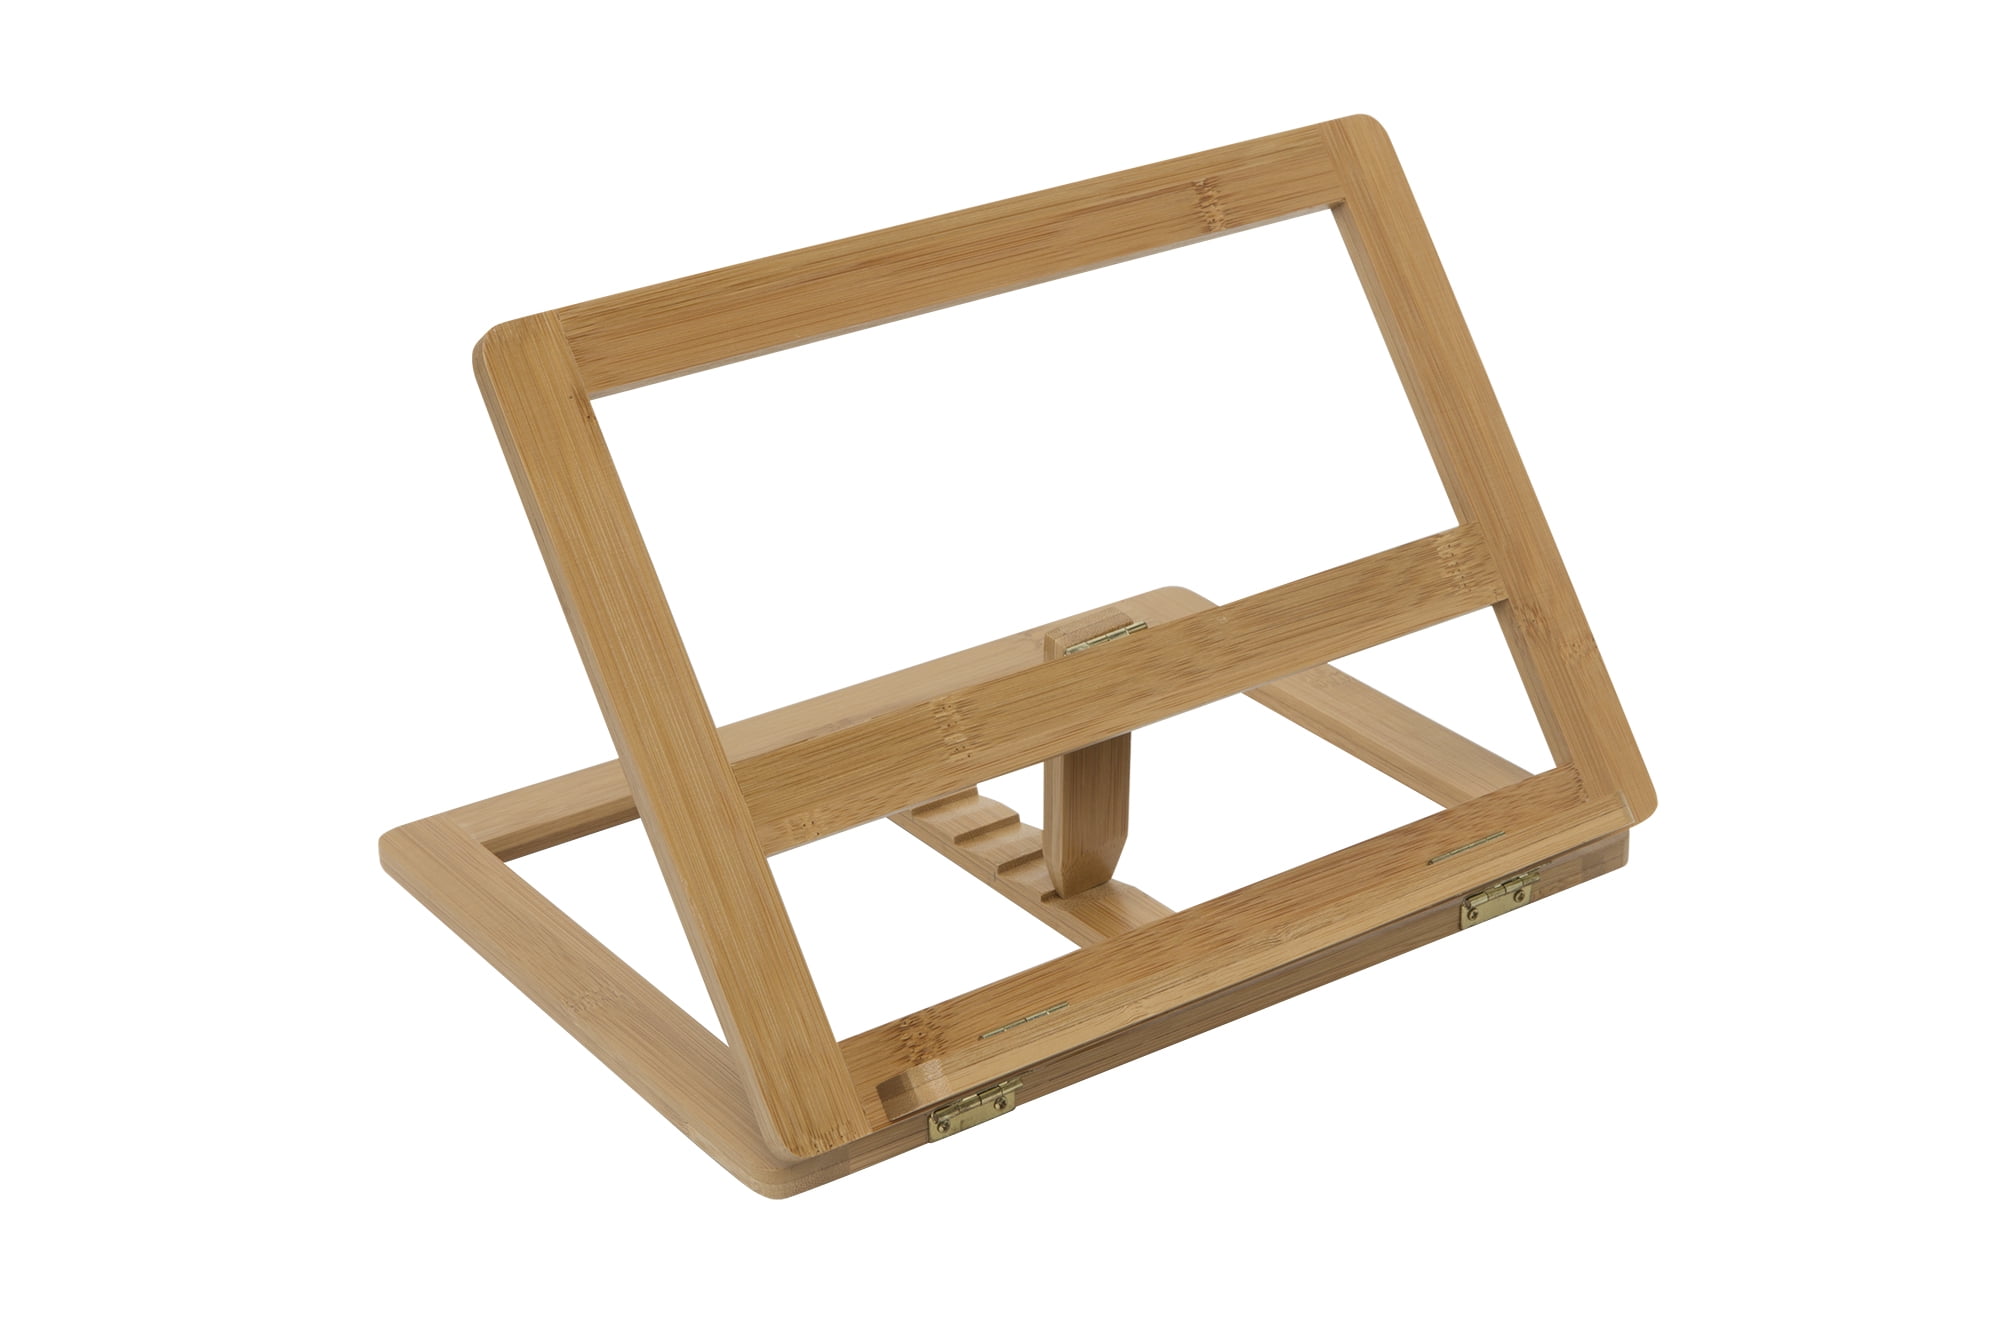 Retro Style Wood Folding Plate Display Easels Photo Holder Display Stand #3 